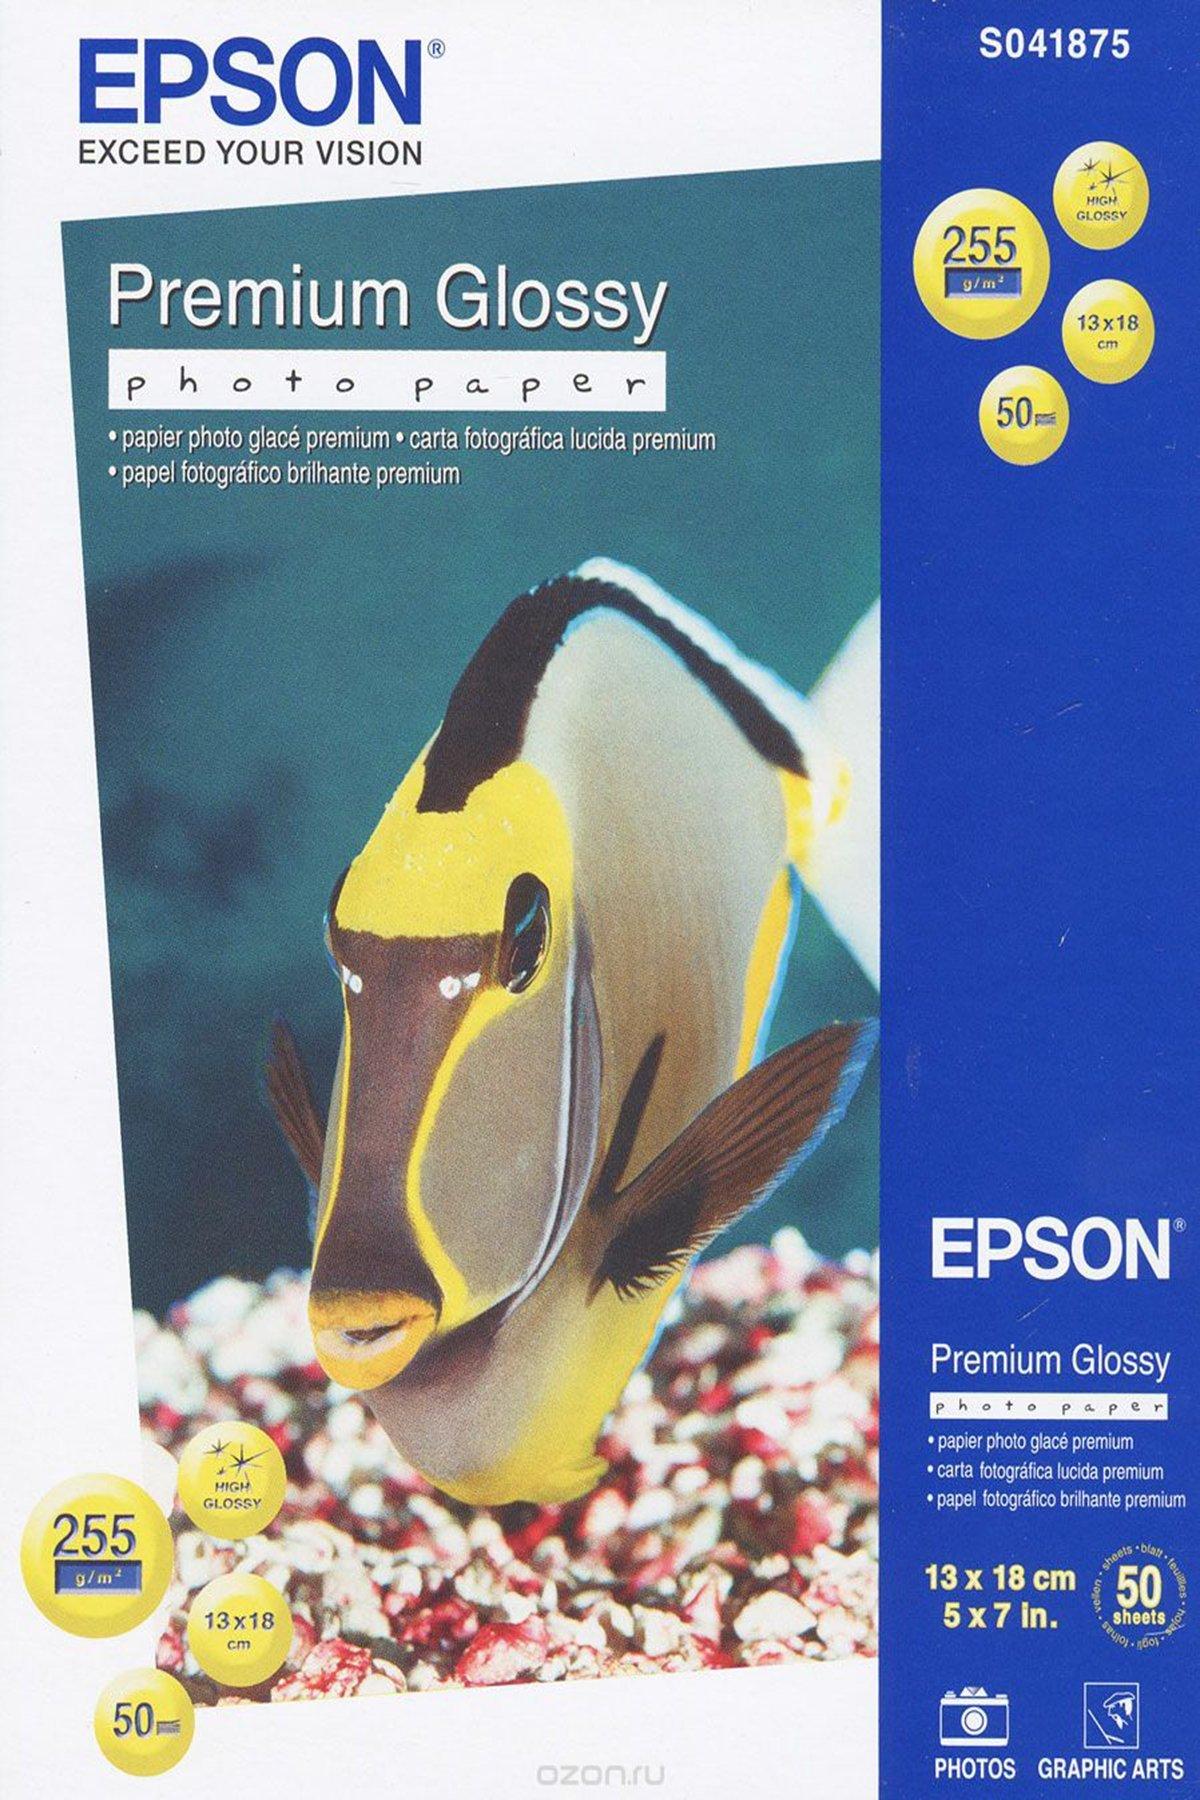 Premium Glossy Photo Paper - 13x18cm - 50 Sheets, Paper and Media, Ink &  Paper, Products